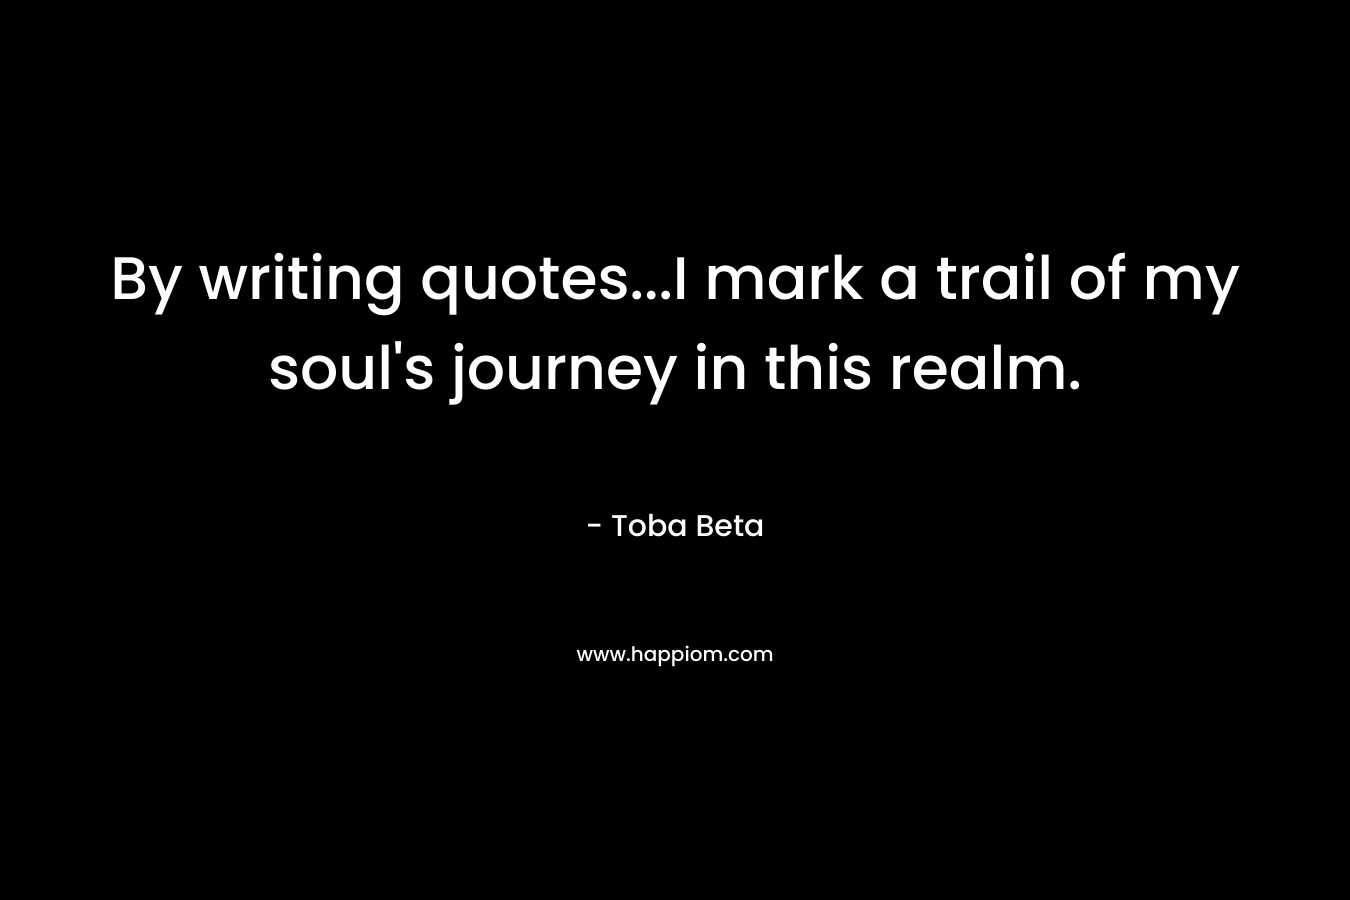 By writing quotes...I mark a trail of my soul's journey in this realm.